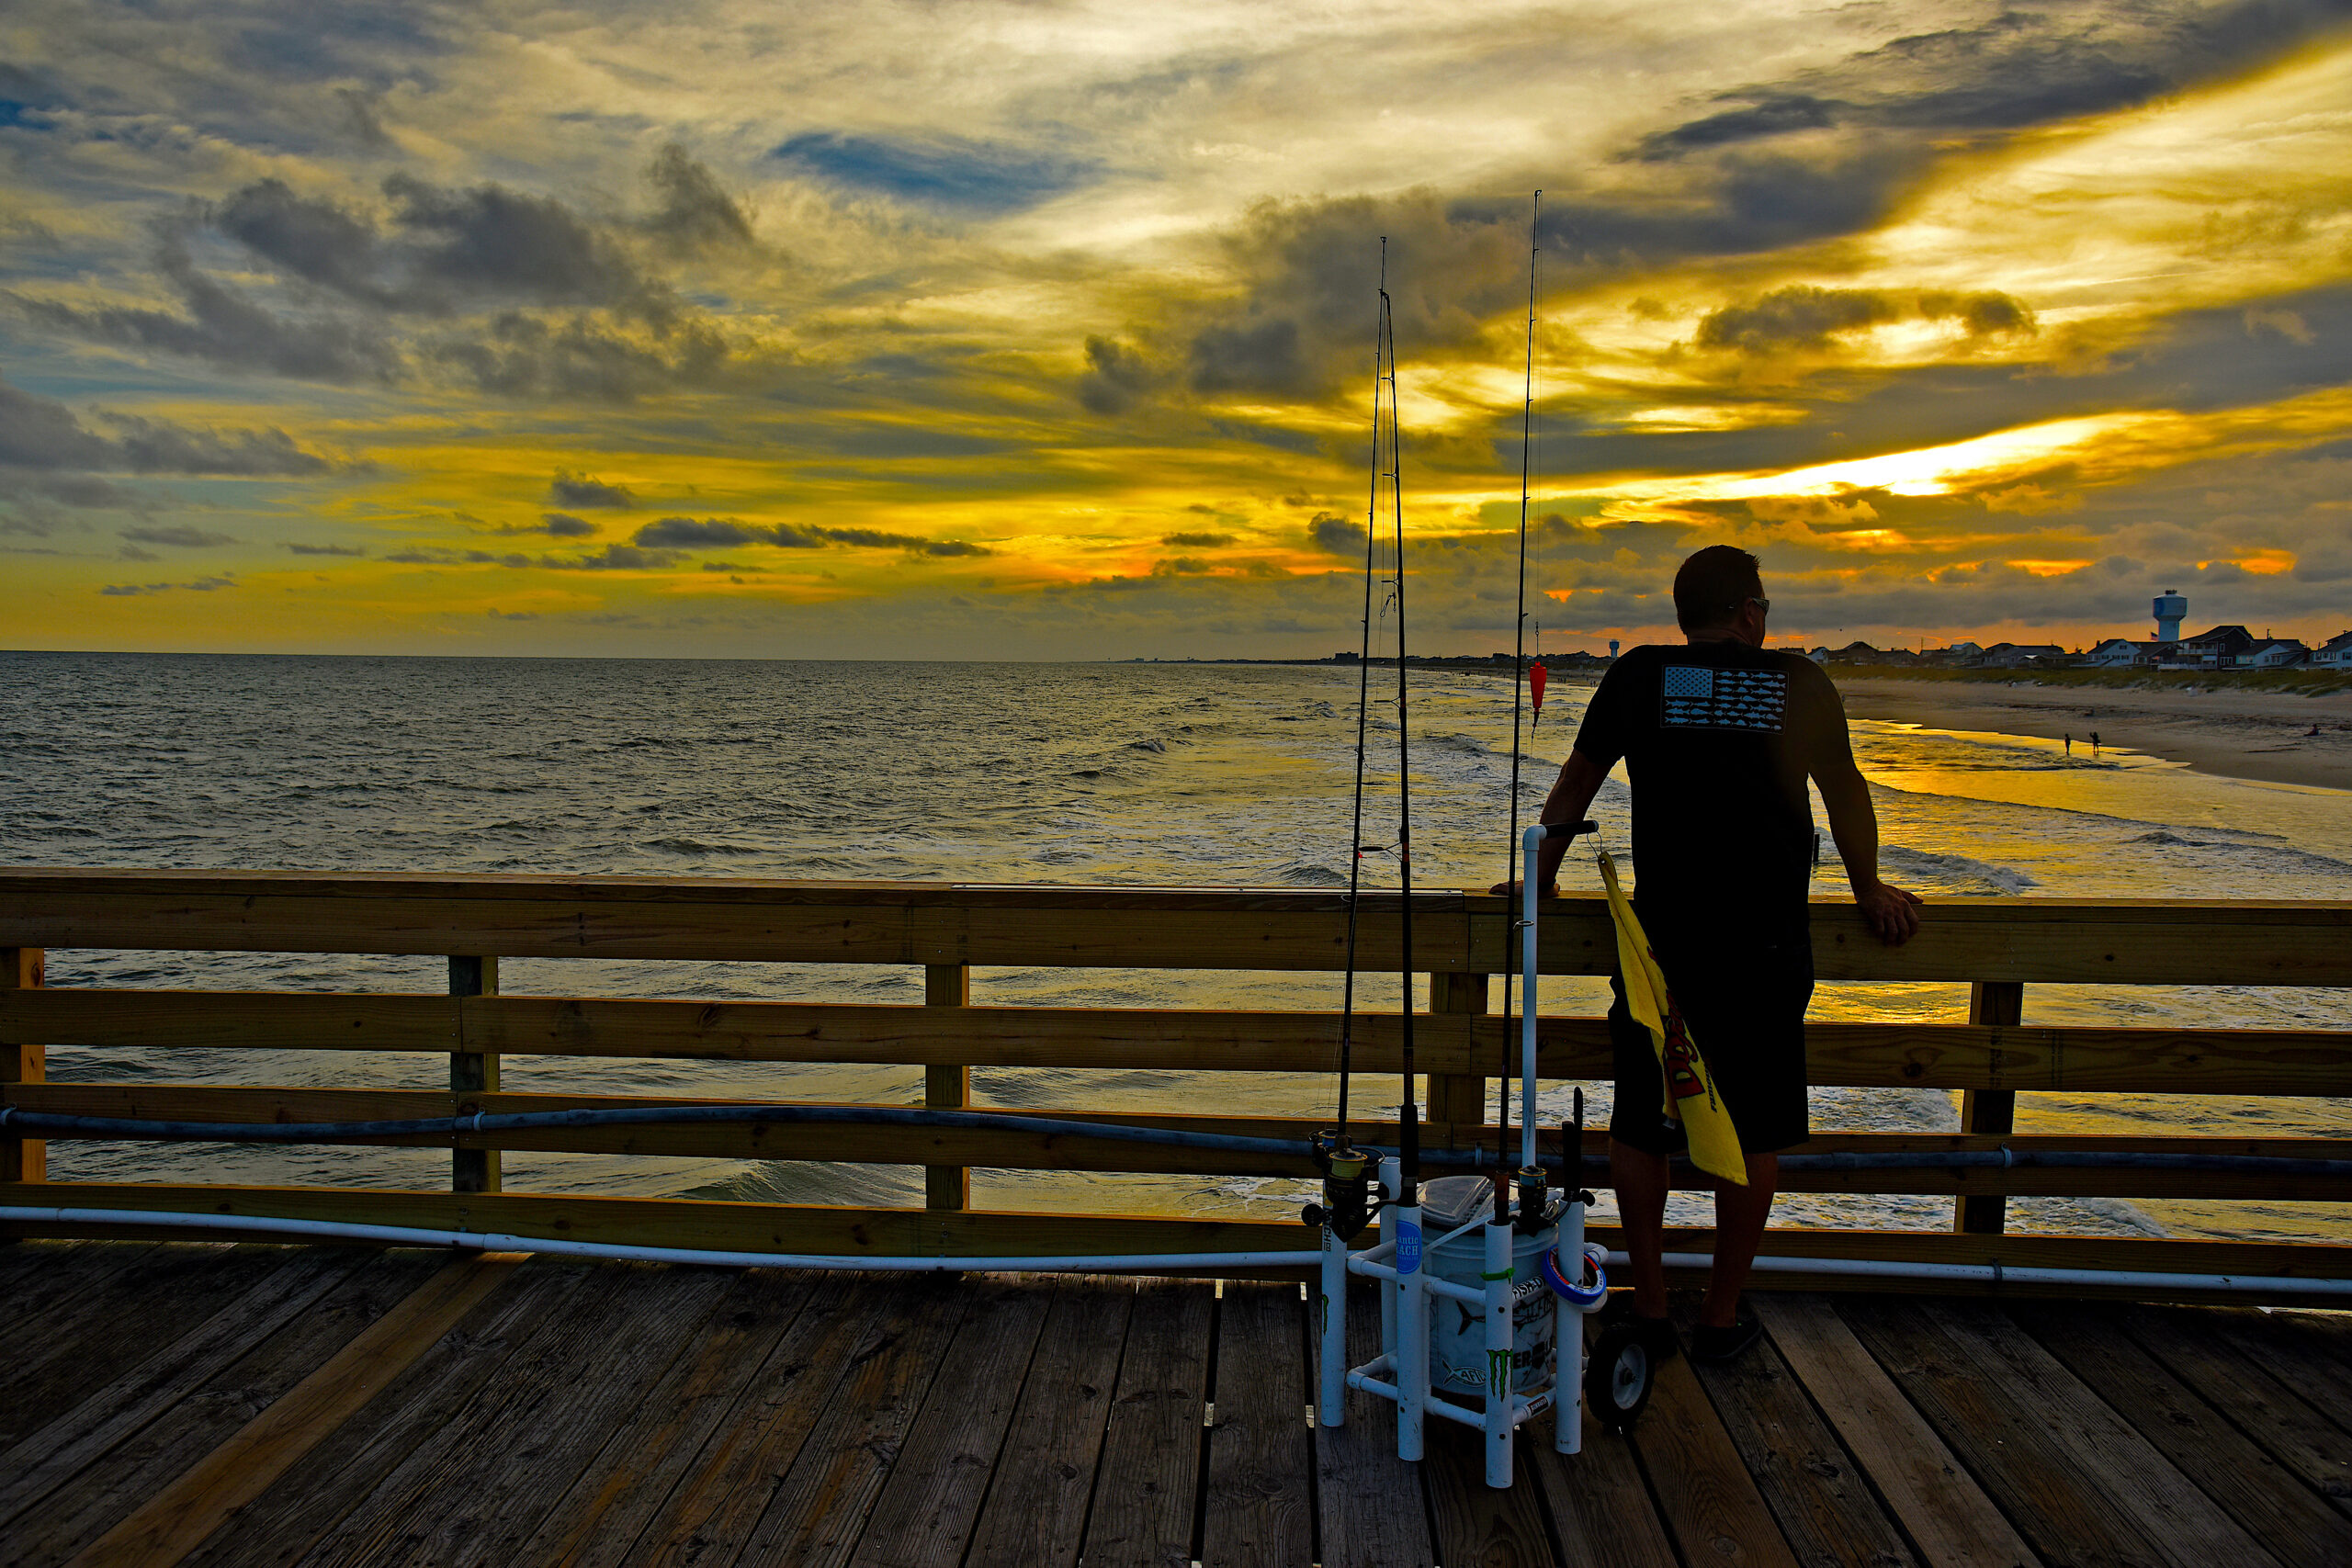 image: fisher on a pier.